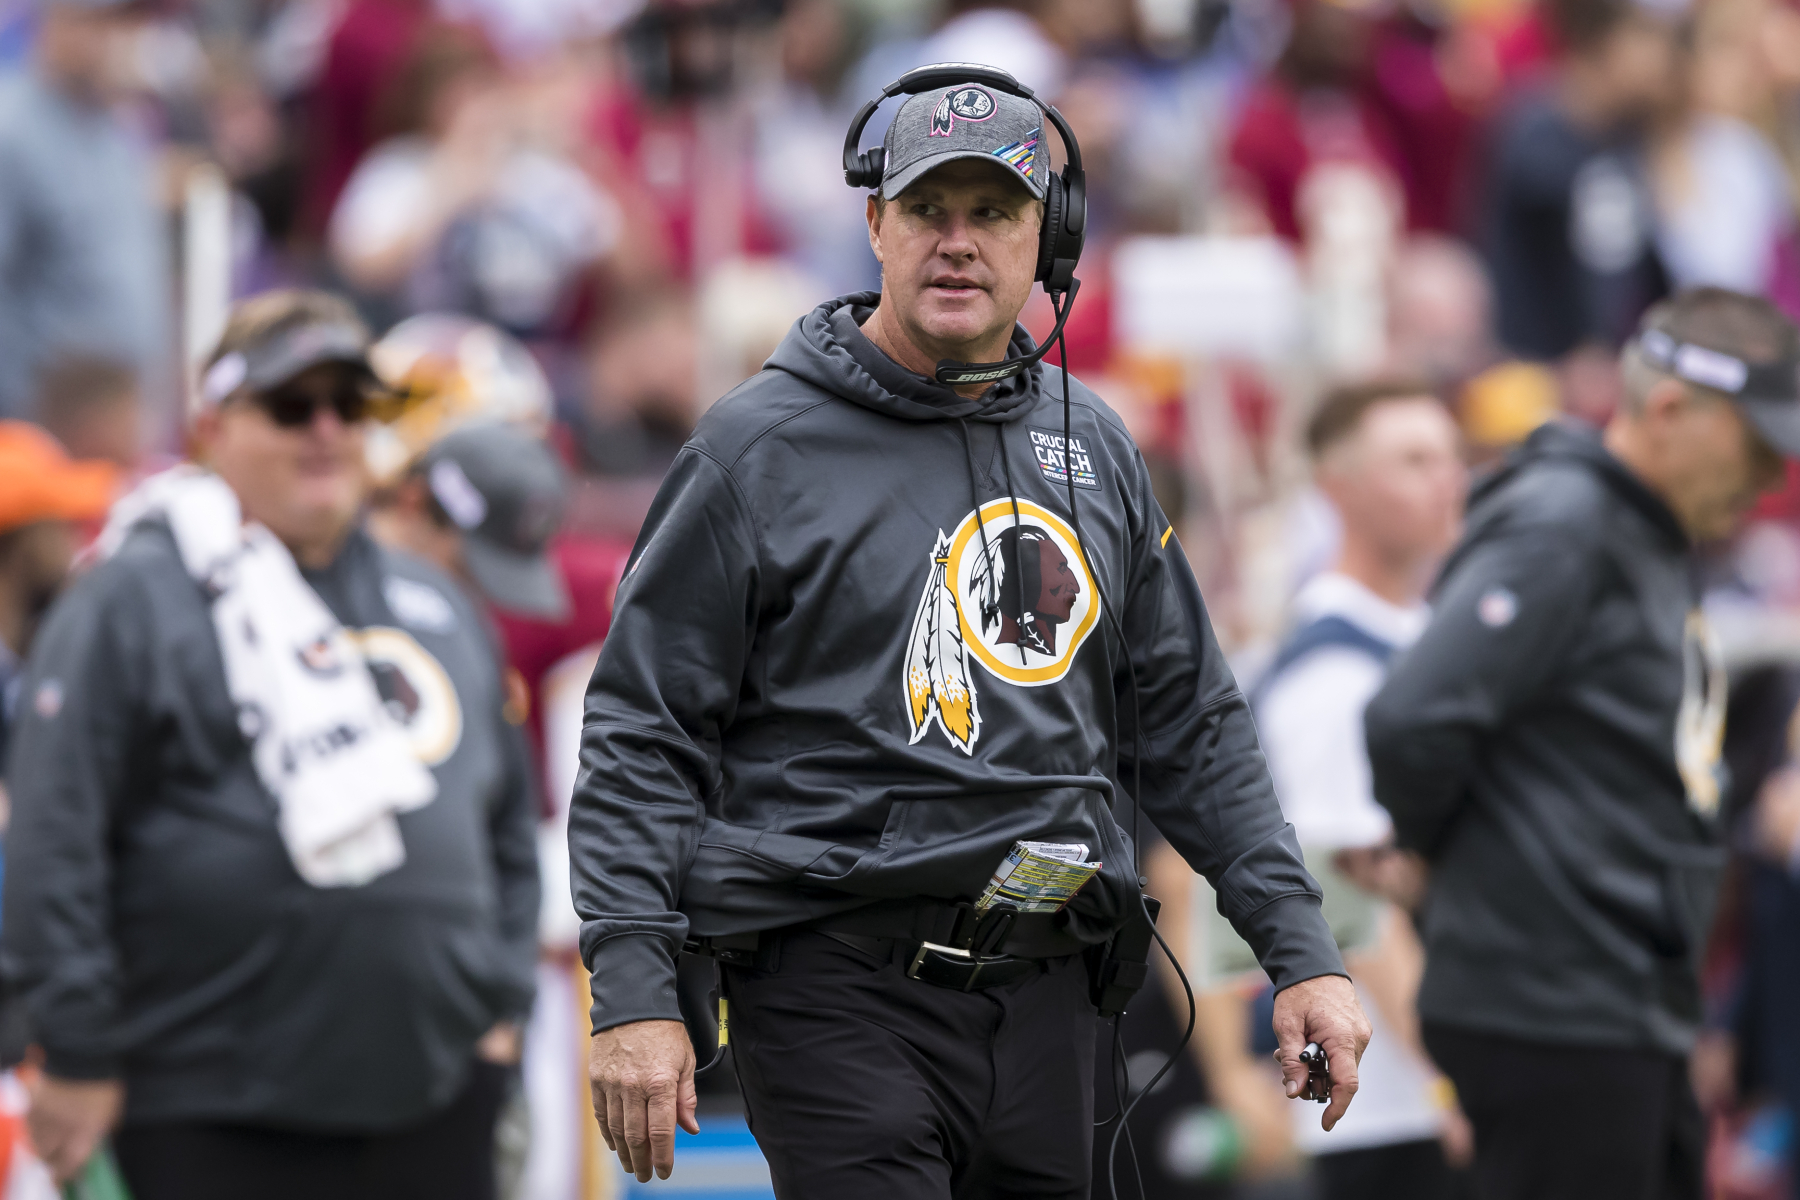 Jay Gruden's time as head coach of the Washington Redskins went horribly. What is his net worth and how does it compare to Jon Gruden's?